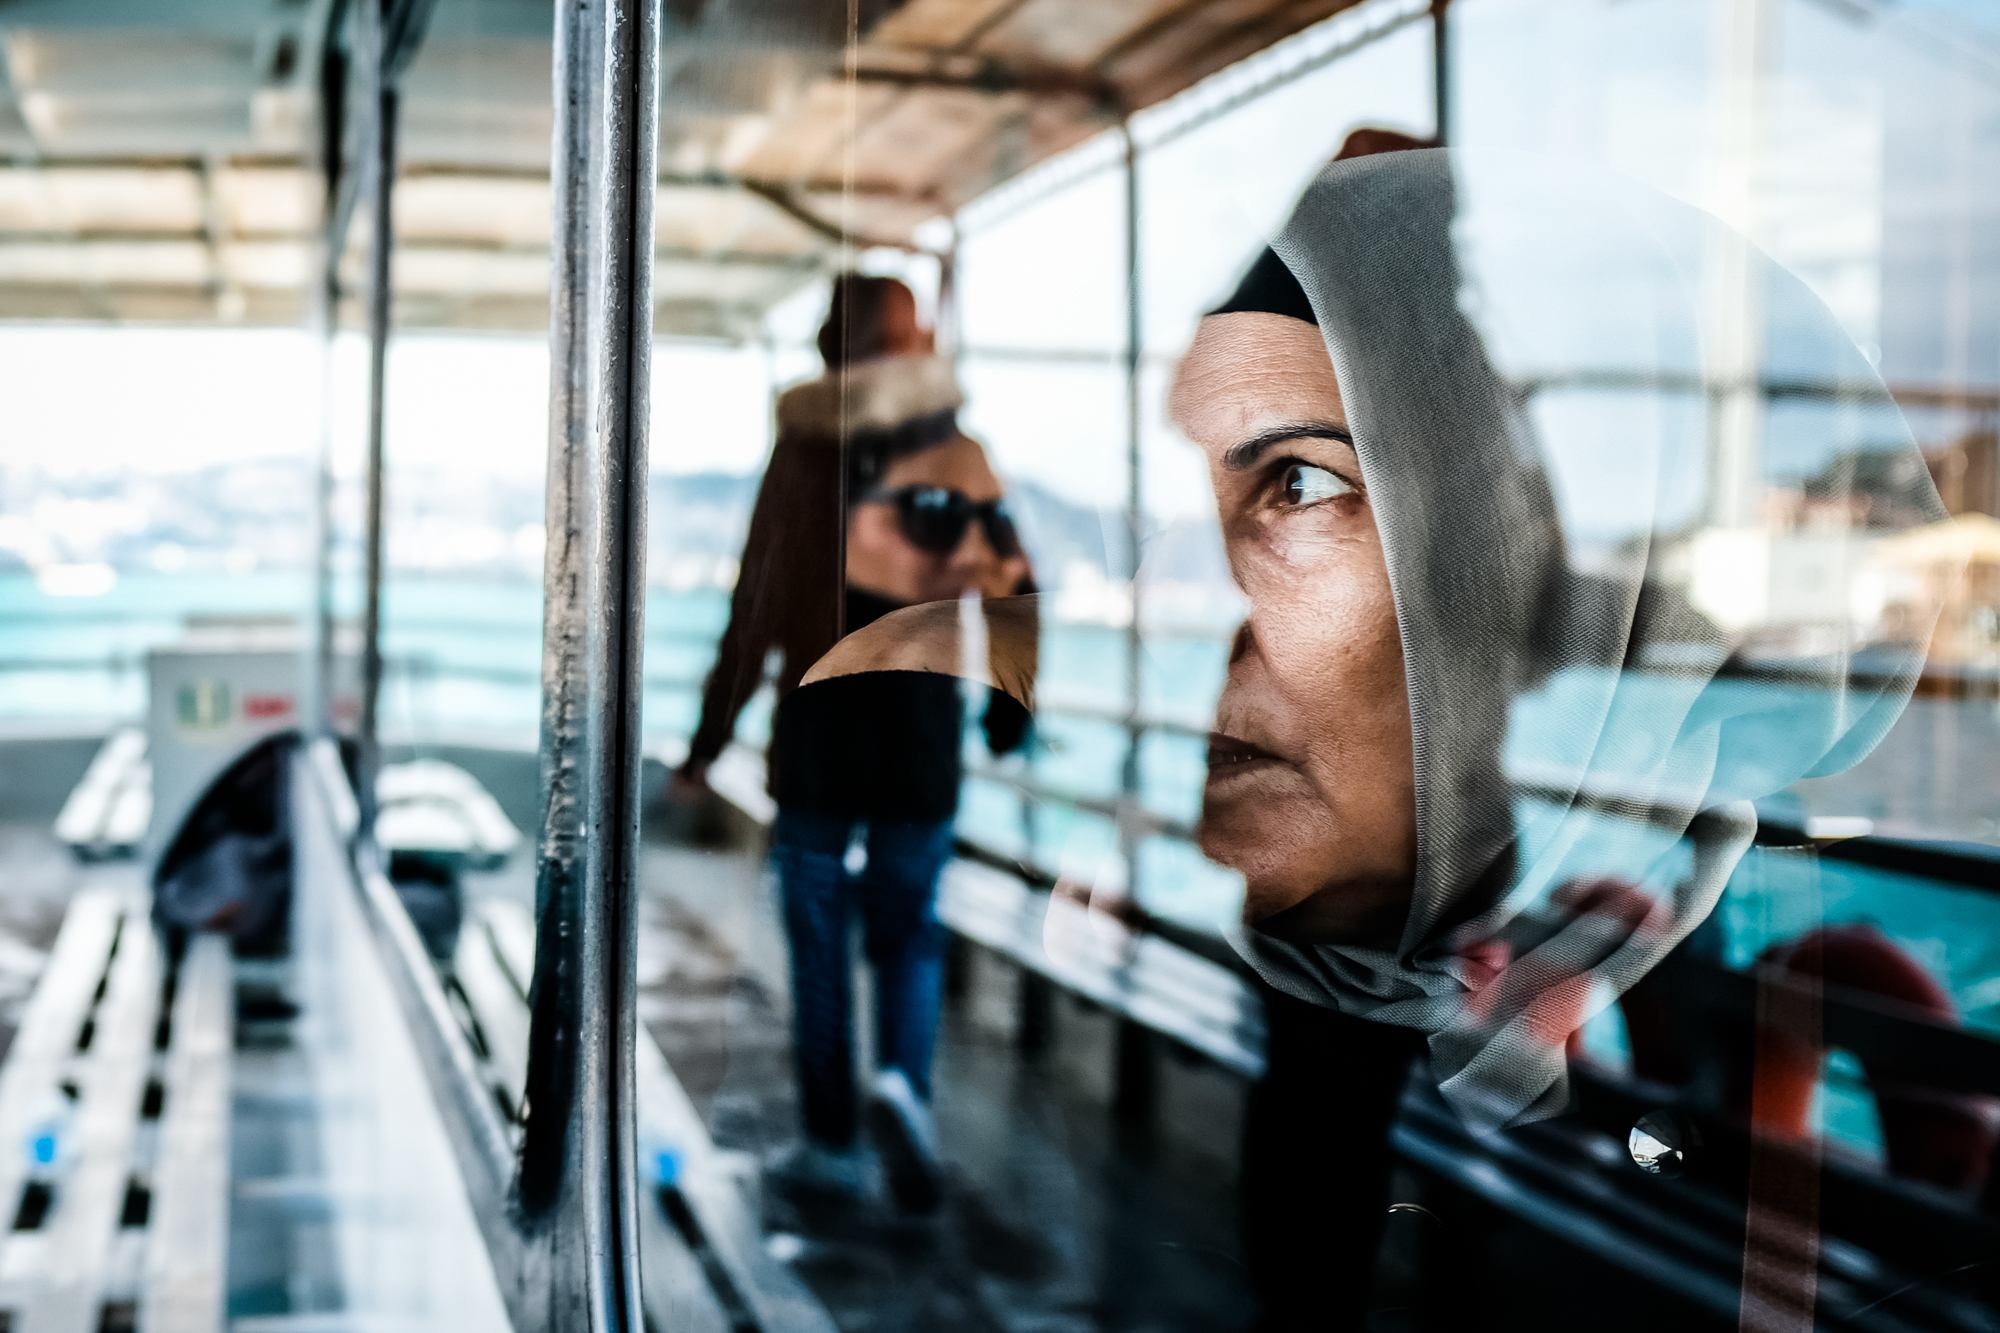 A Muslim woman looks out the window of a ferry boat in Istanbul, Turkey